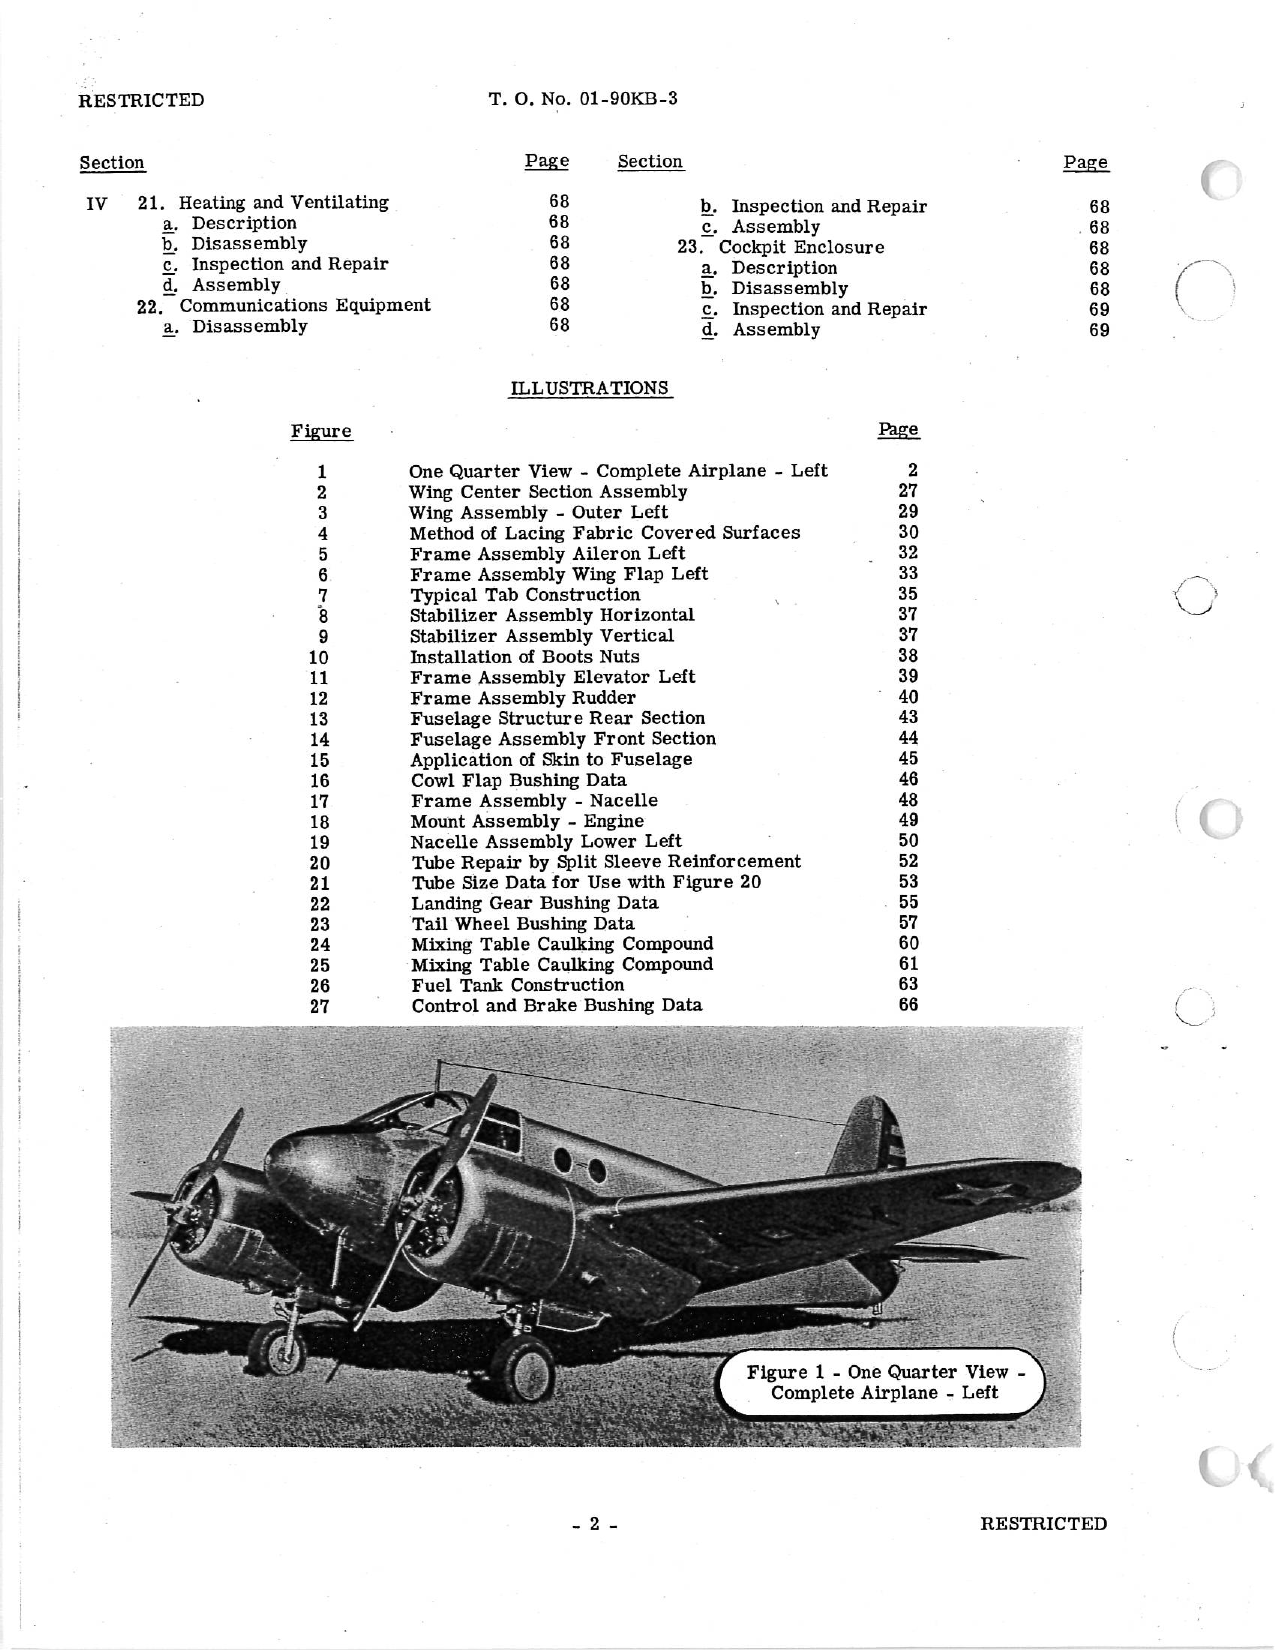 Sample page 4 from AirCorps Library document: Handbook of Overhaul Instructions: AT-10